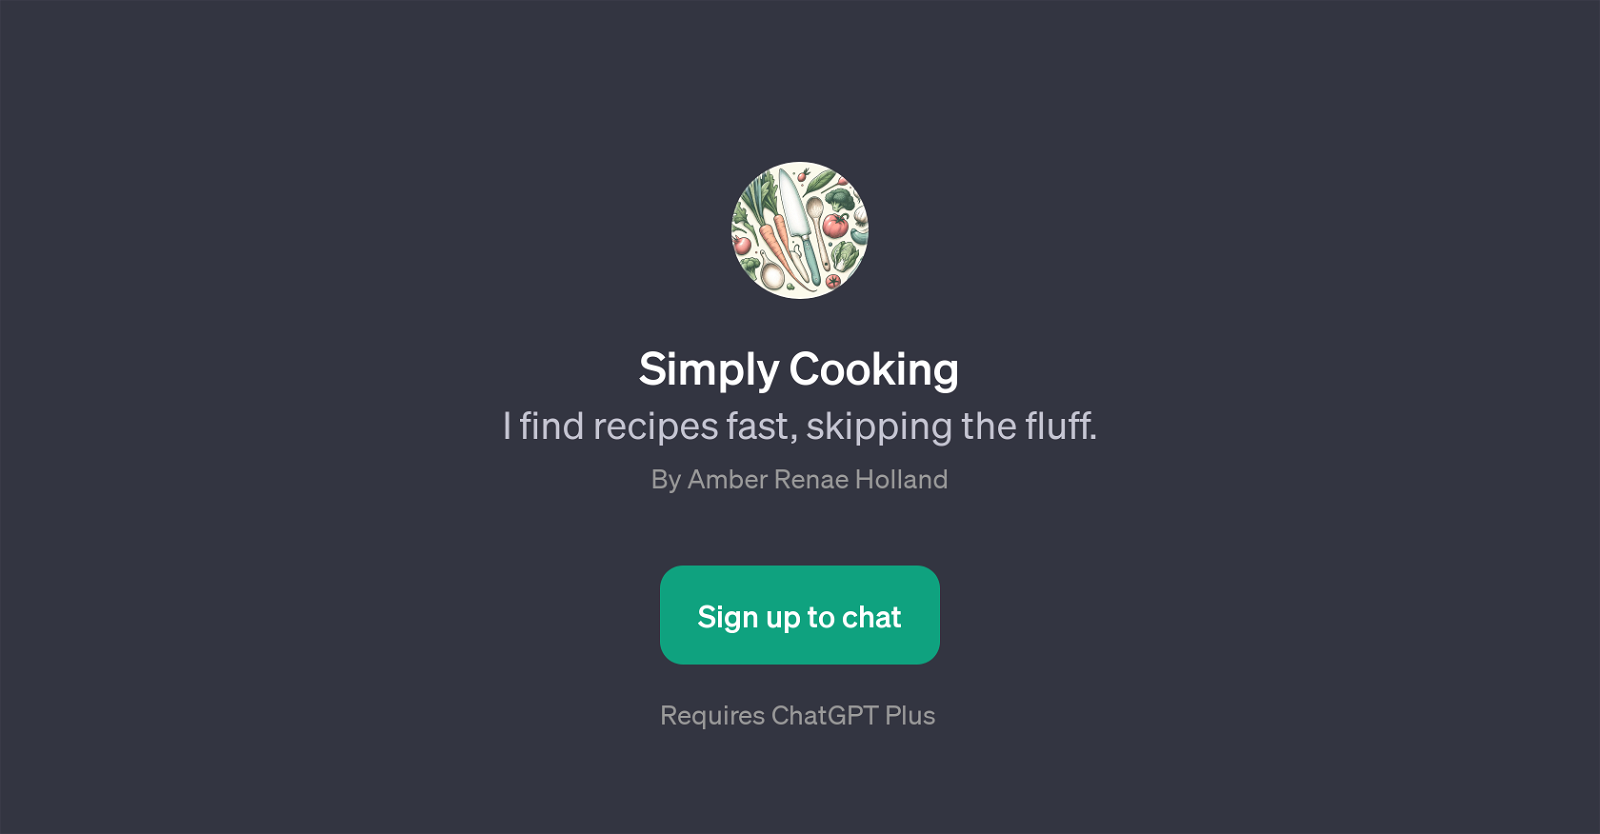 Simply Cooking website